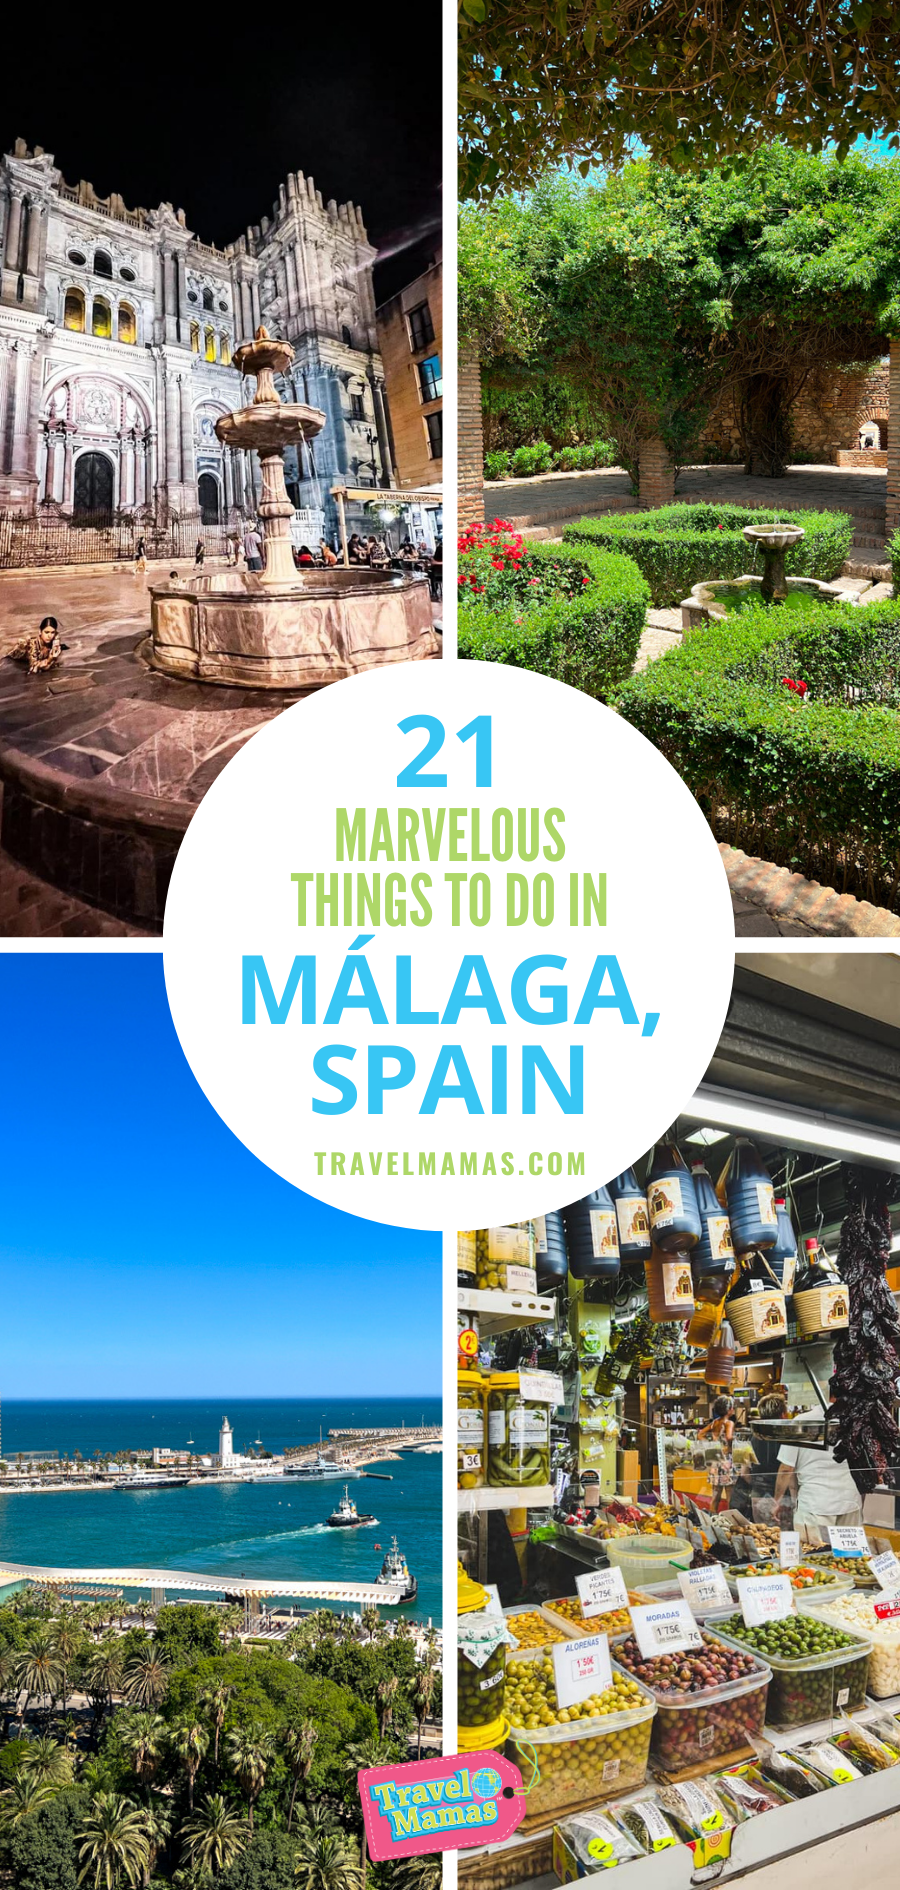 Marvelous Things to Do in Malaga, Spain